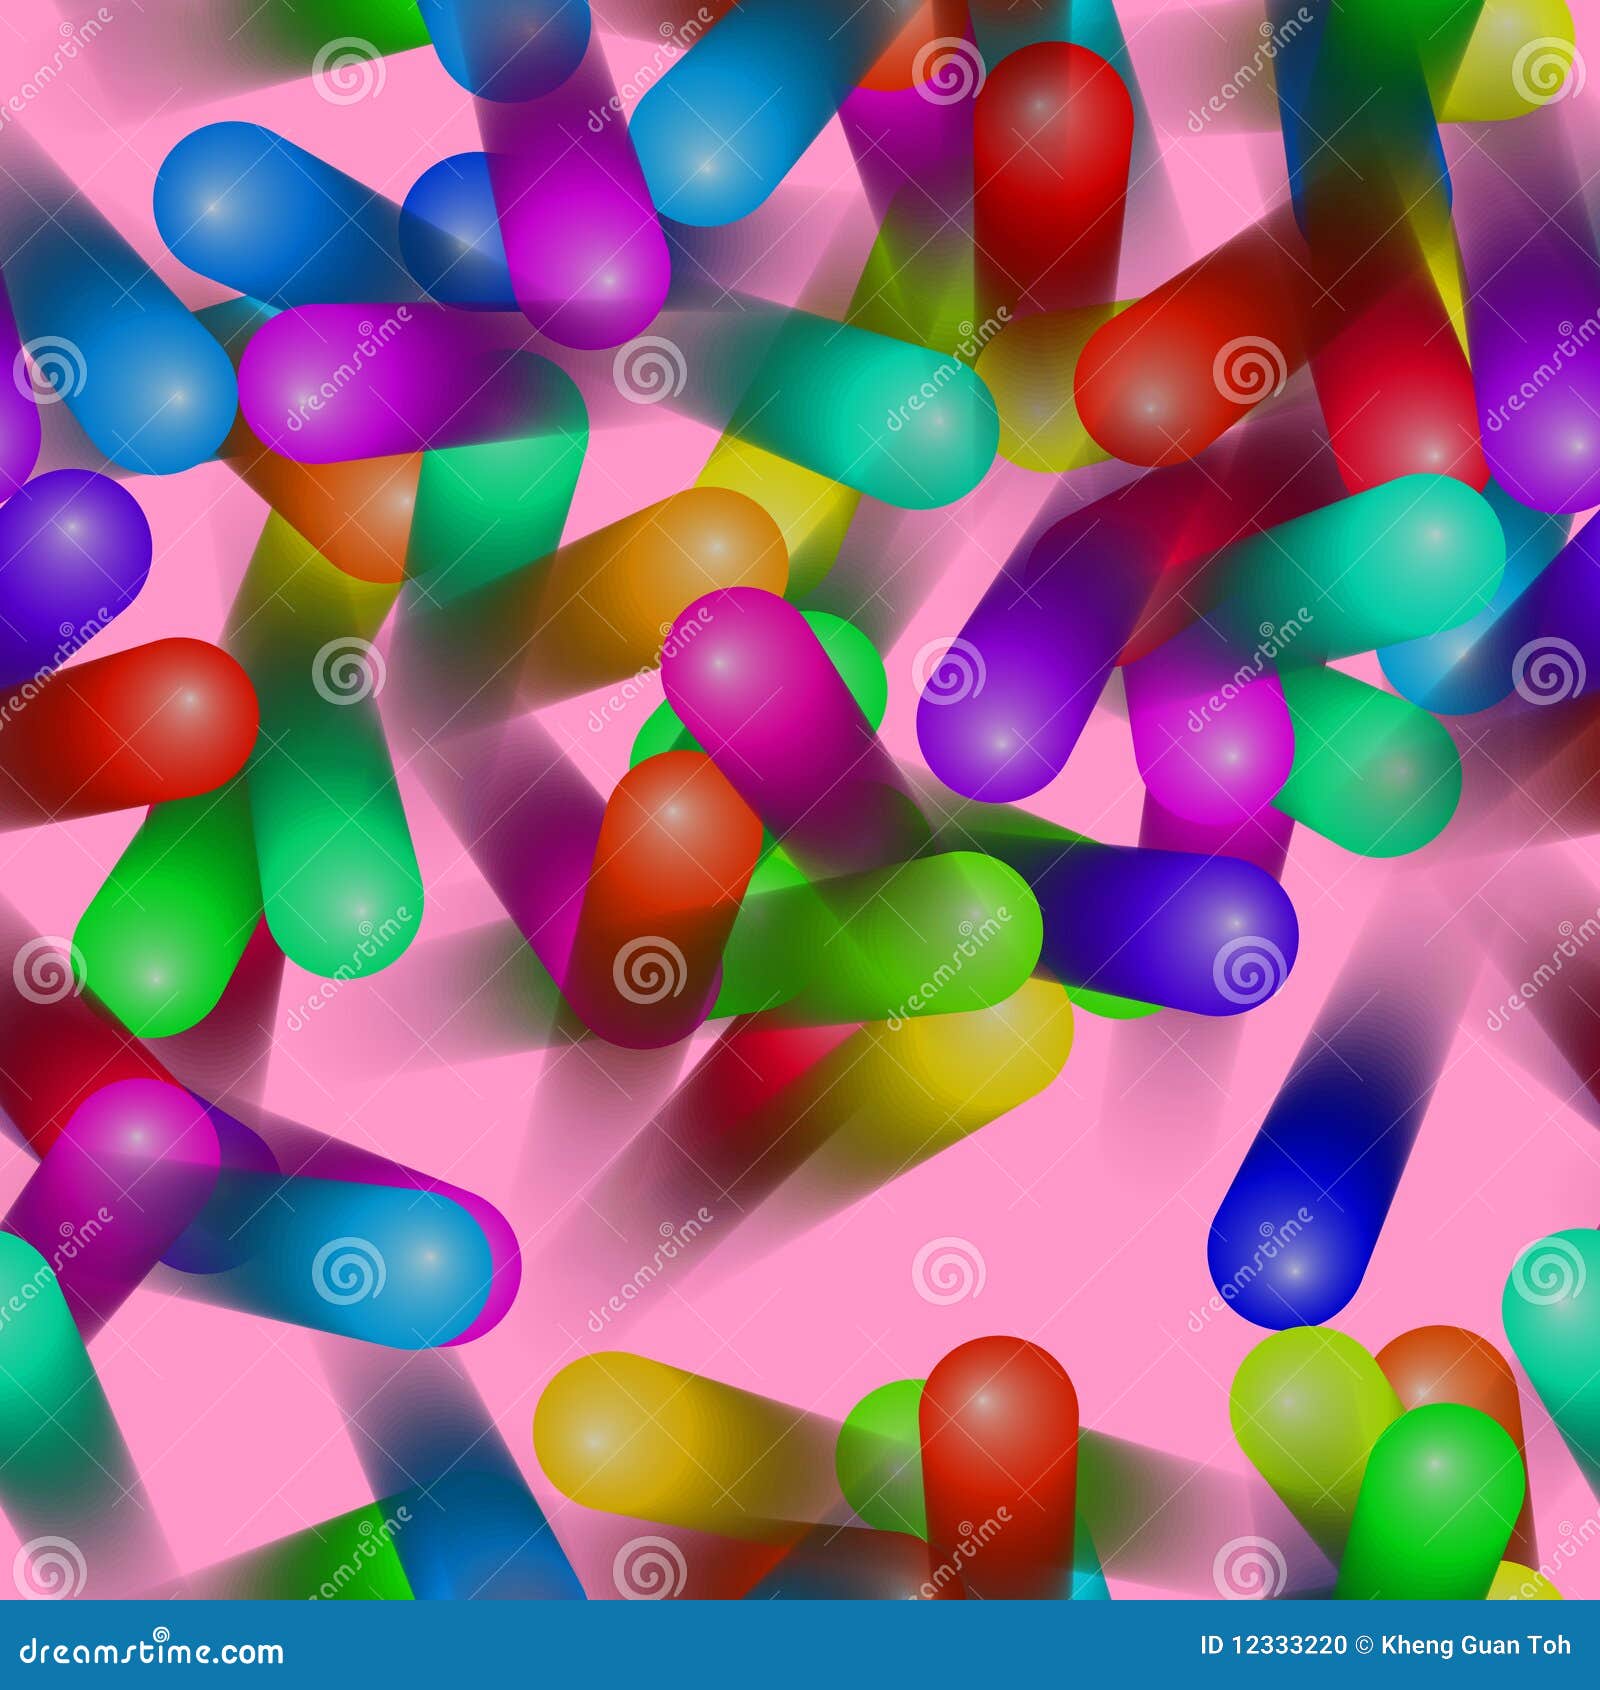 390 Jellybean Wallpaper Stock Photos HighRes Pictures and Images  Getty  Images